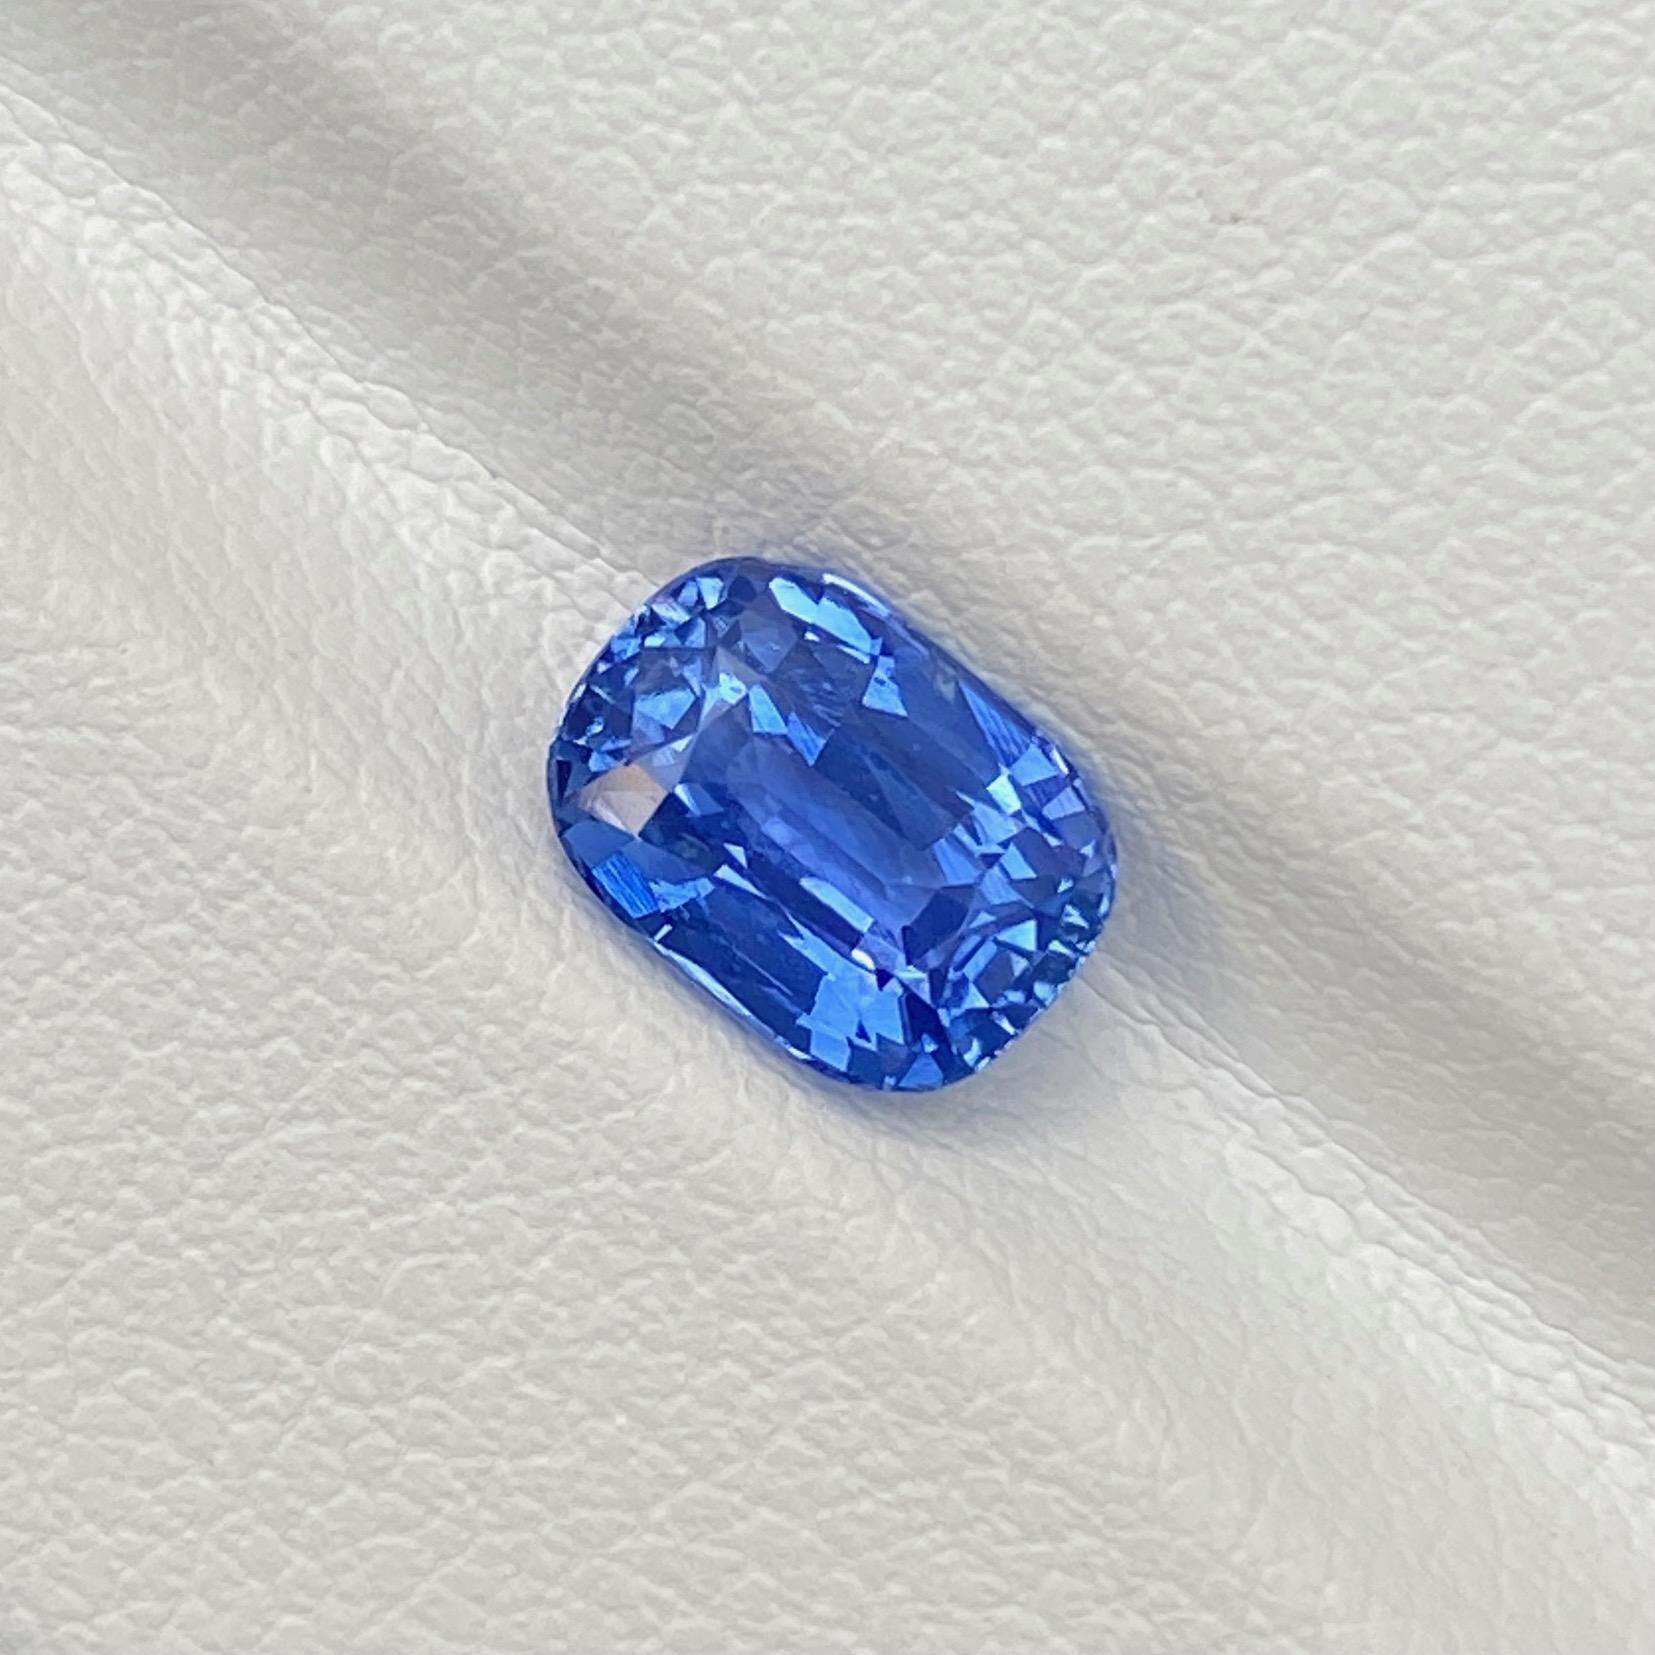 Irresistible Ceylonese cornflower blue sapphire expertly cushion cut to just under 2 carat. Undeniable heritage and colour and certified unheated this natural cornflower blue sapphire would make a spectacular engagement ring.

This cornflower blue